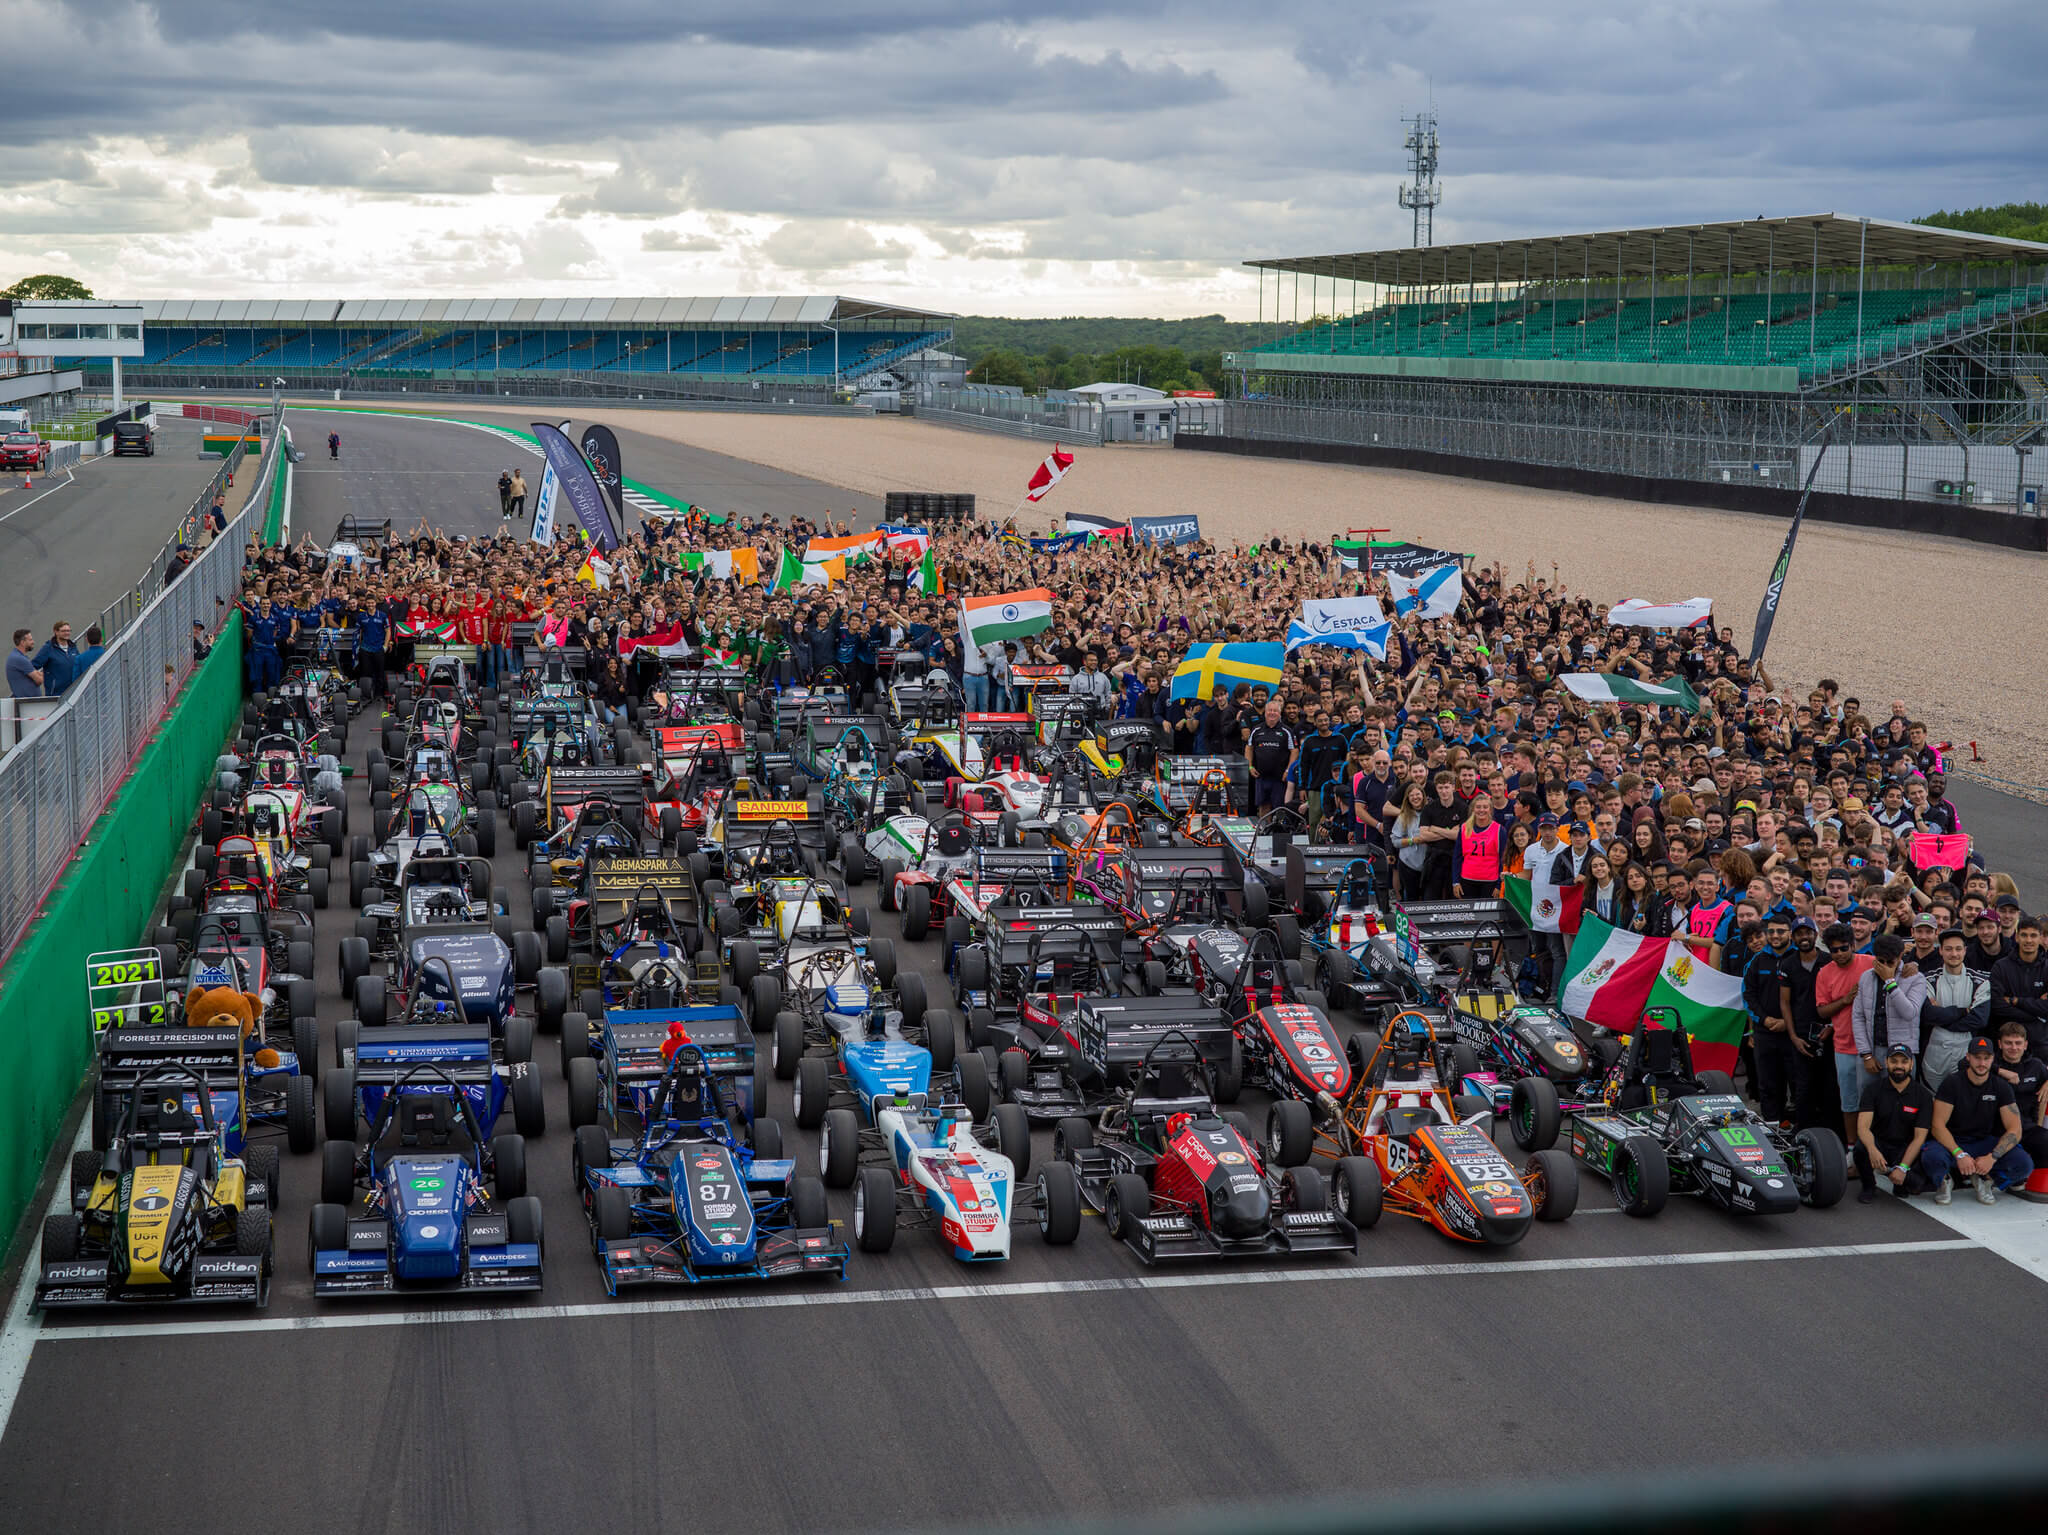 Racing cars lined up at starting line with crowds of Formula Students standing next to them